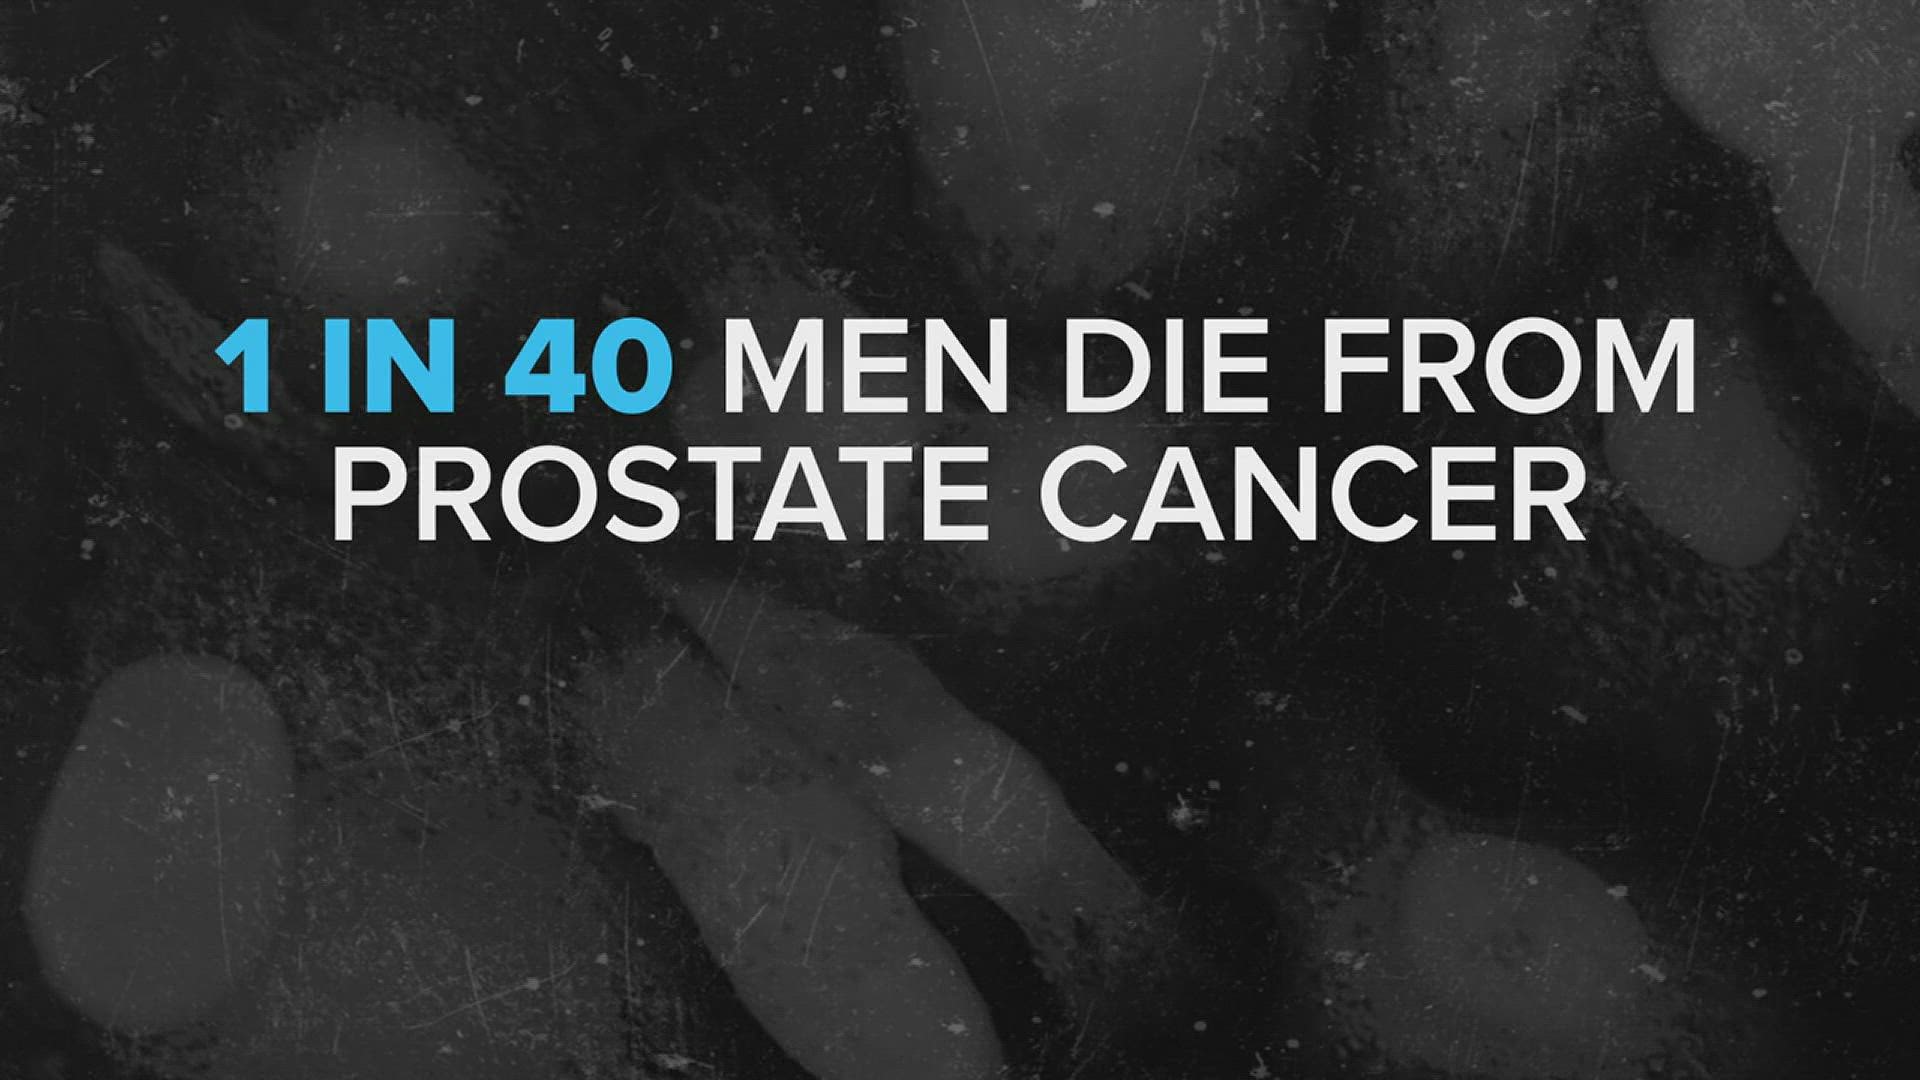 The Gift of Life non-profit is offering free prostate-specific antigen blood tests in honor of Prostate Cancer Awareness Month. Appointments are required.